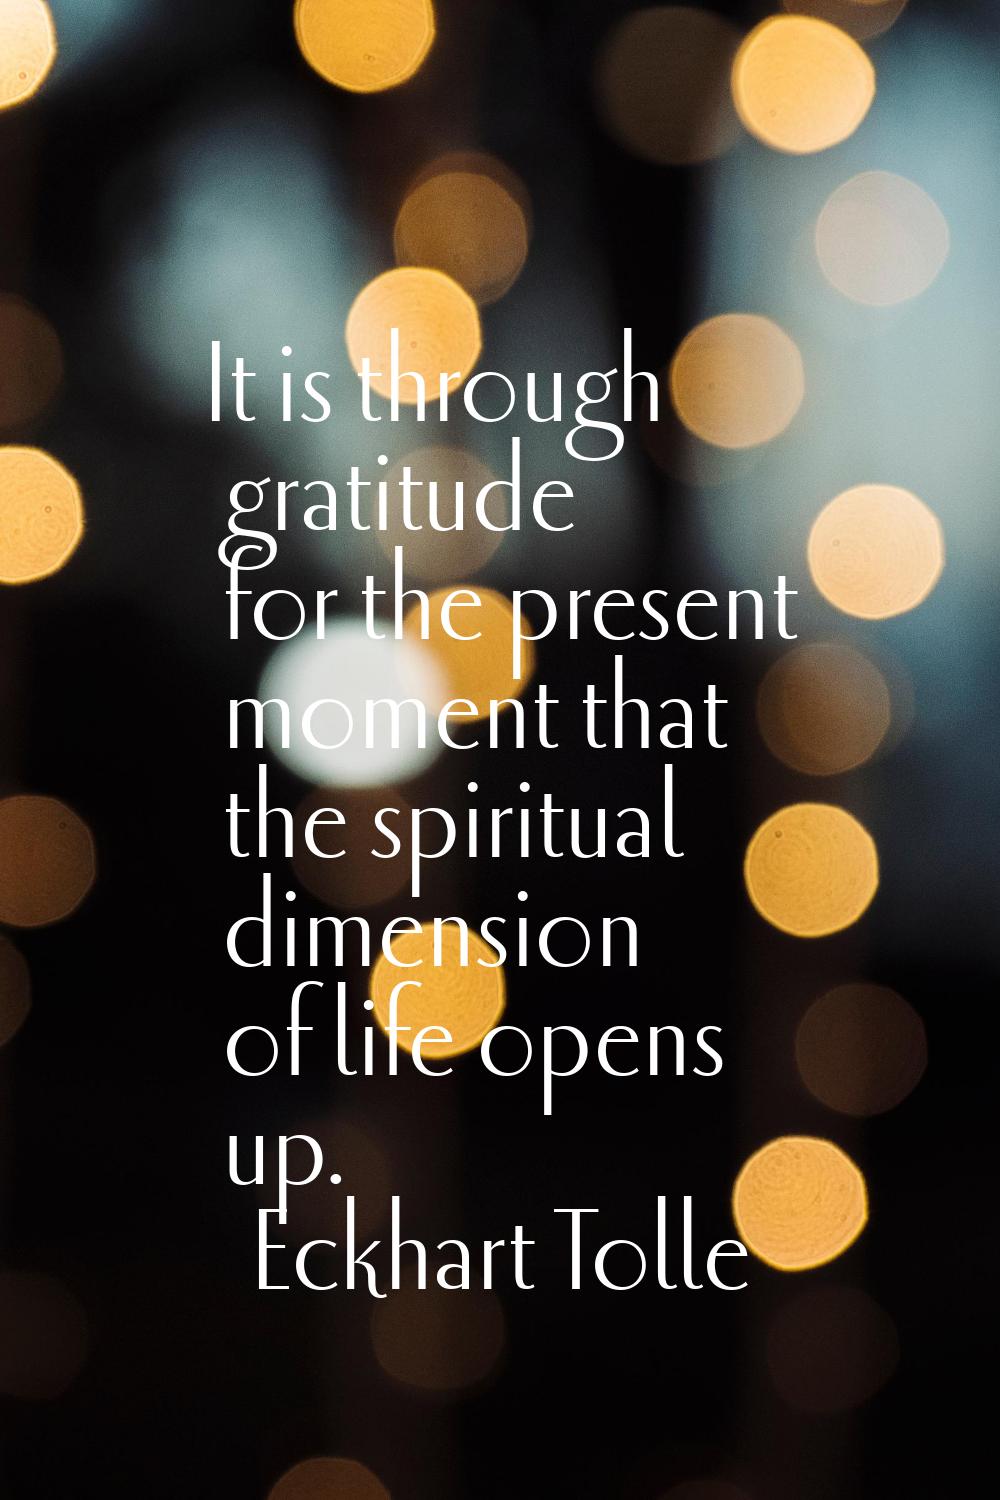 It is through gratitude for the present moment that the spiritual dimension of life opens up.